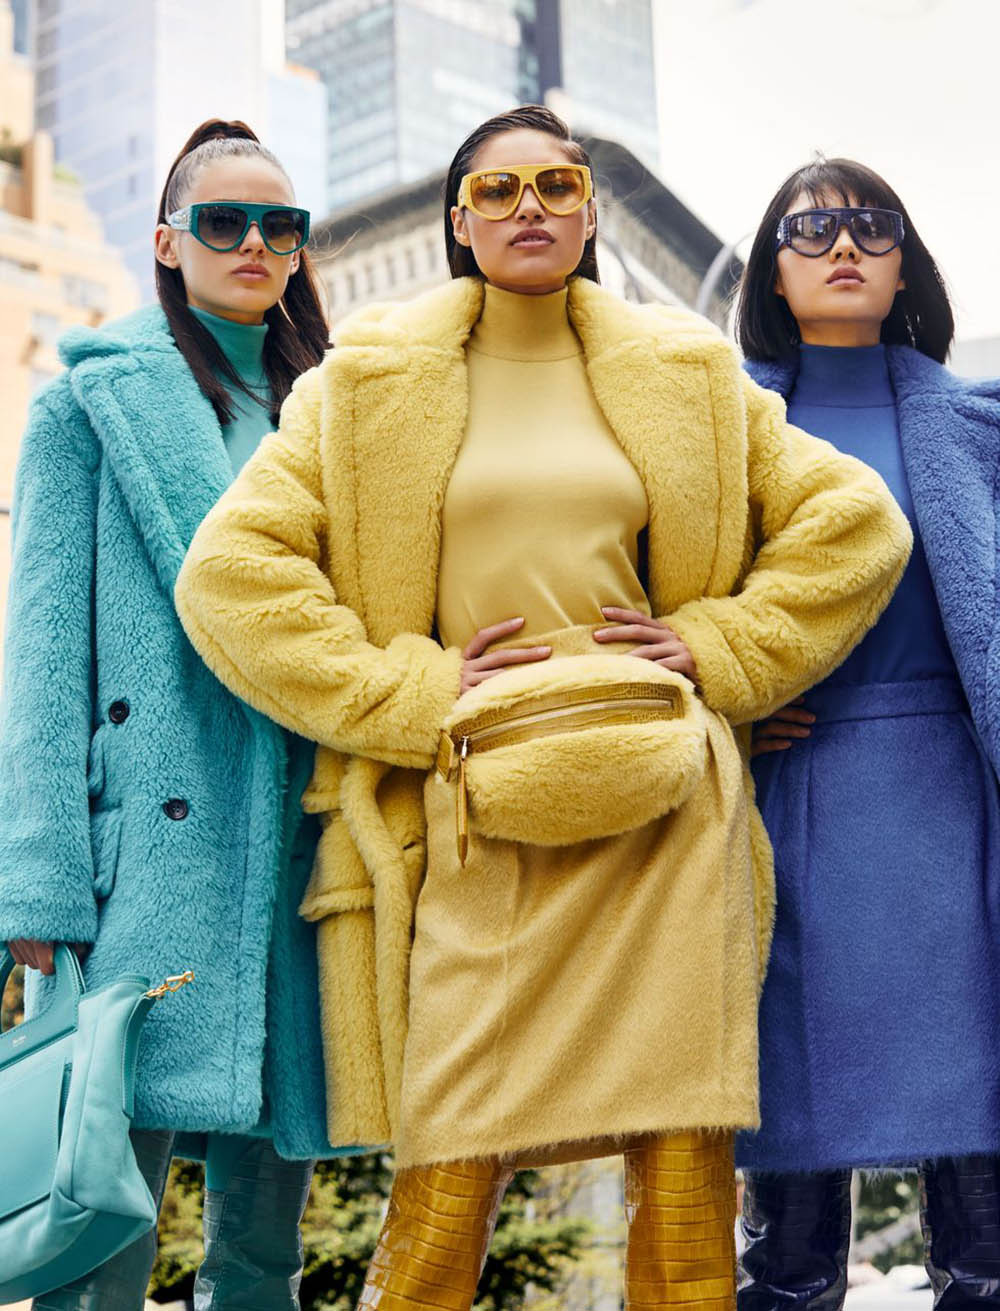 ''Squad Goals'' by Max Papendieck for Elle US December 2019